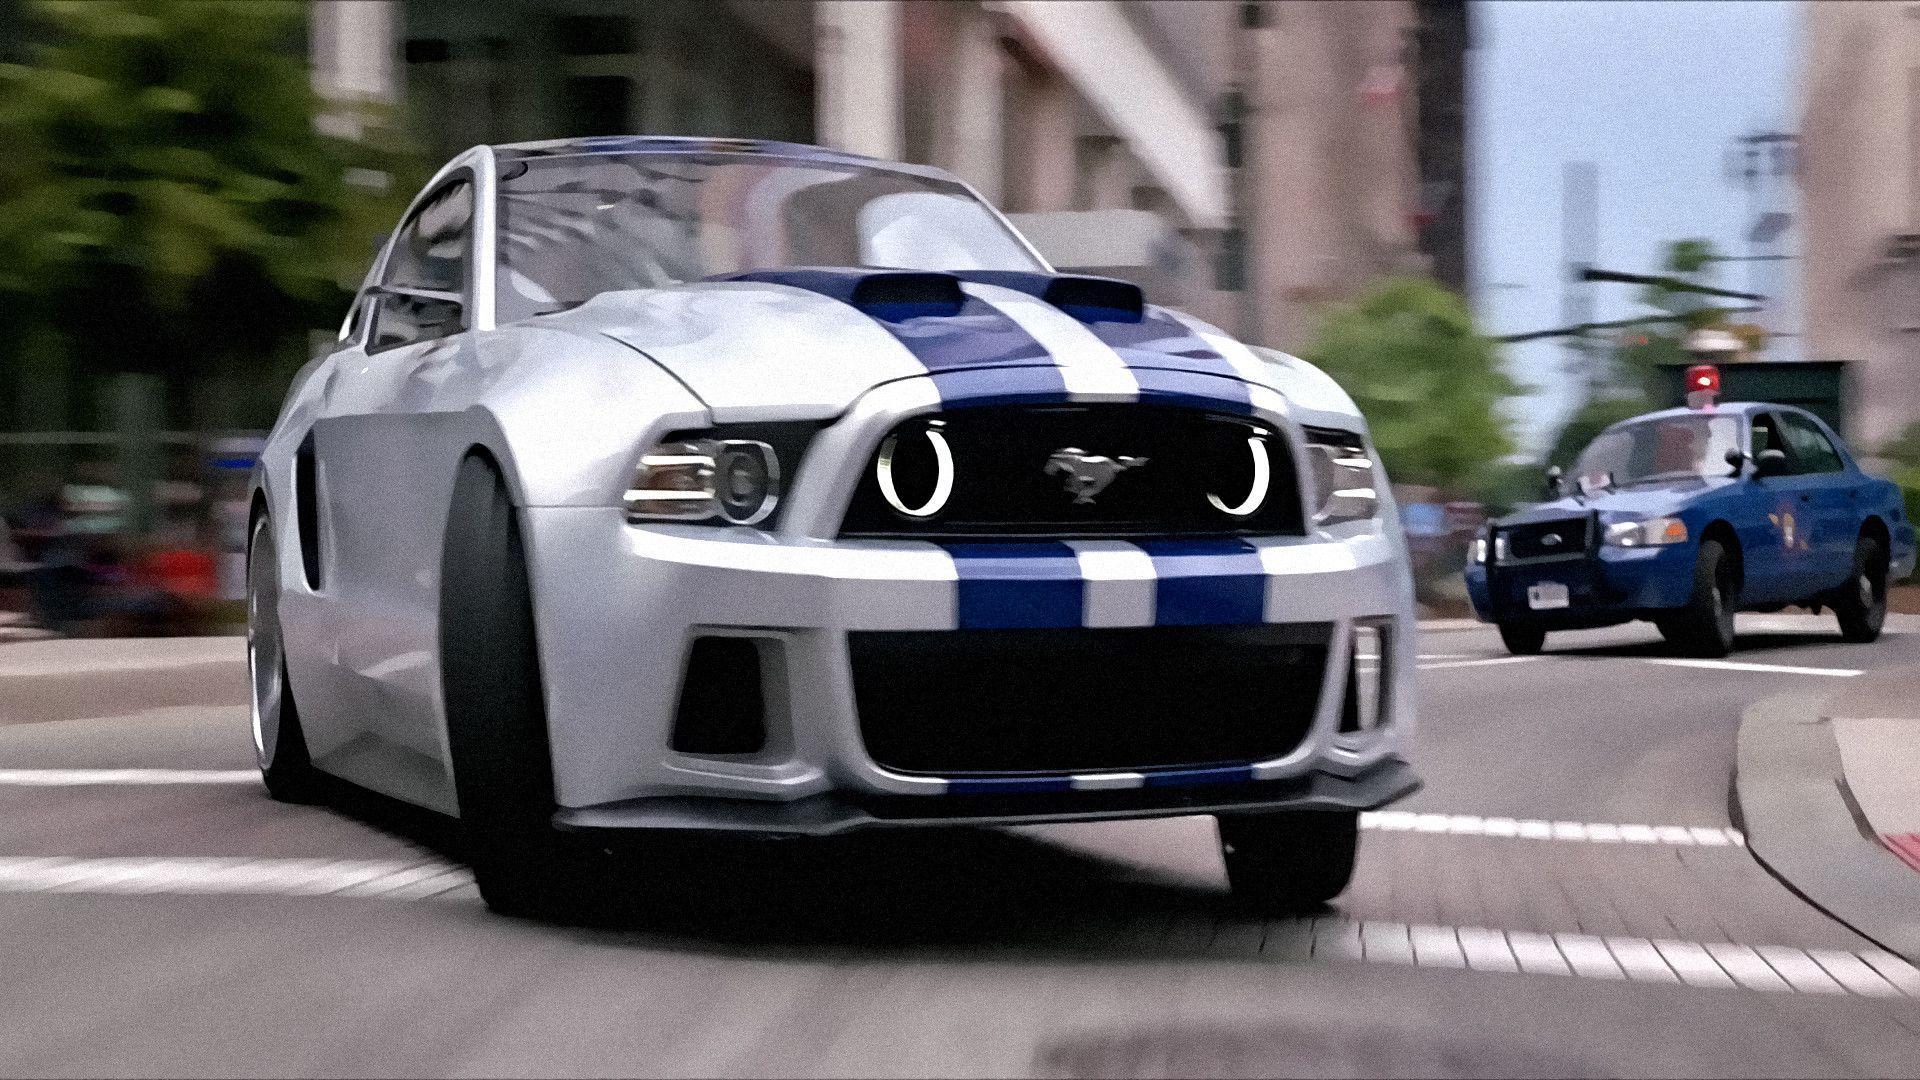 Need For Speed movie wallpaper 1920x1080